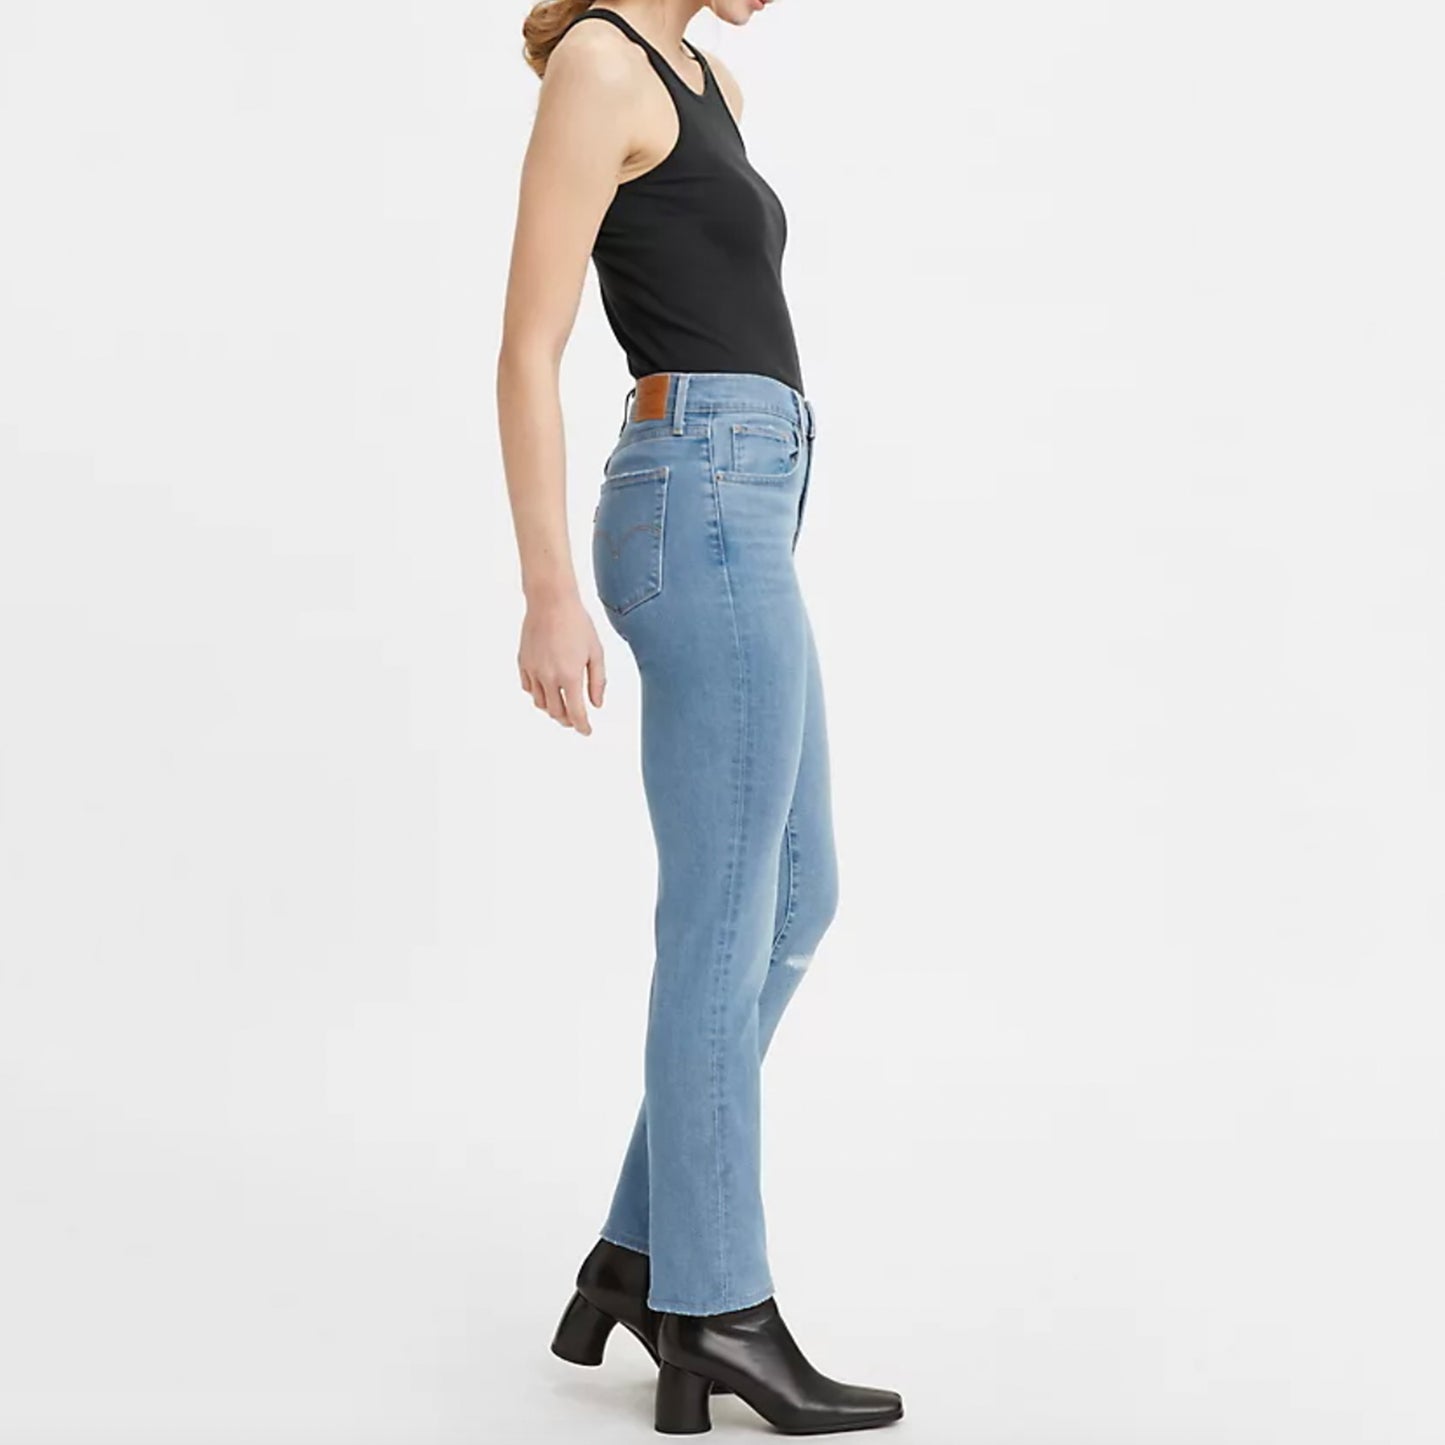 Levi's 724 High Rise Straight Rio Long Bottoms Your favorite high rise has been updated with a classic straight leg. They’ve got just enough stretch, so they’ll hug and flatter your figure while keeping you comfortable throughout your day